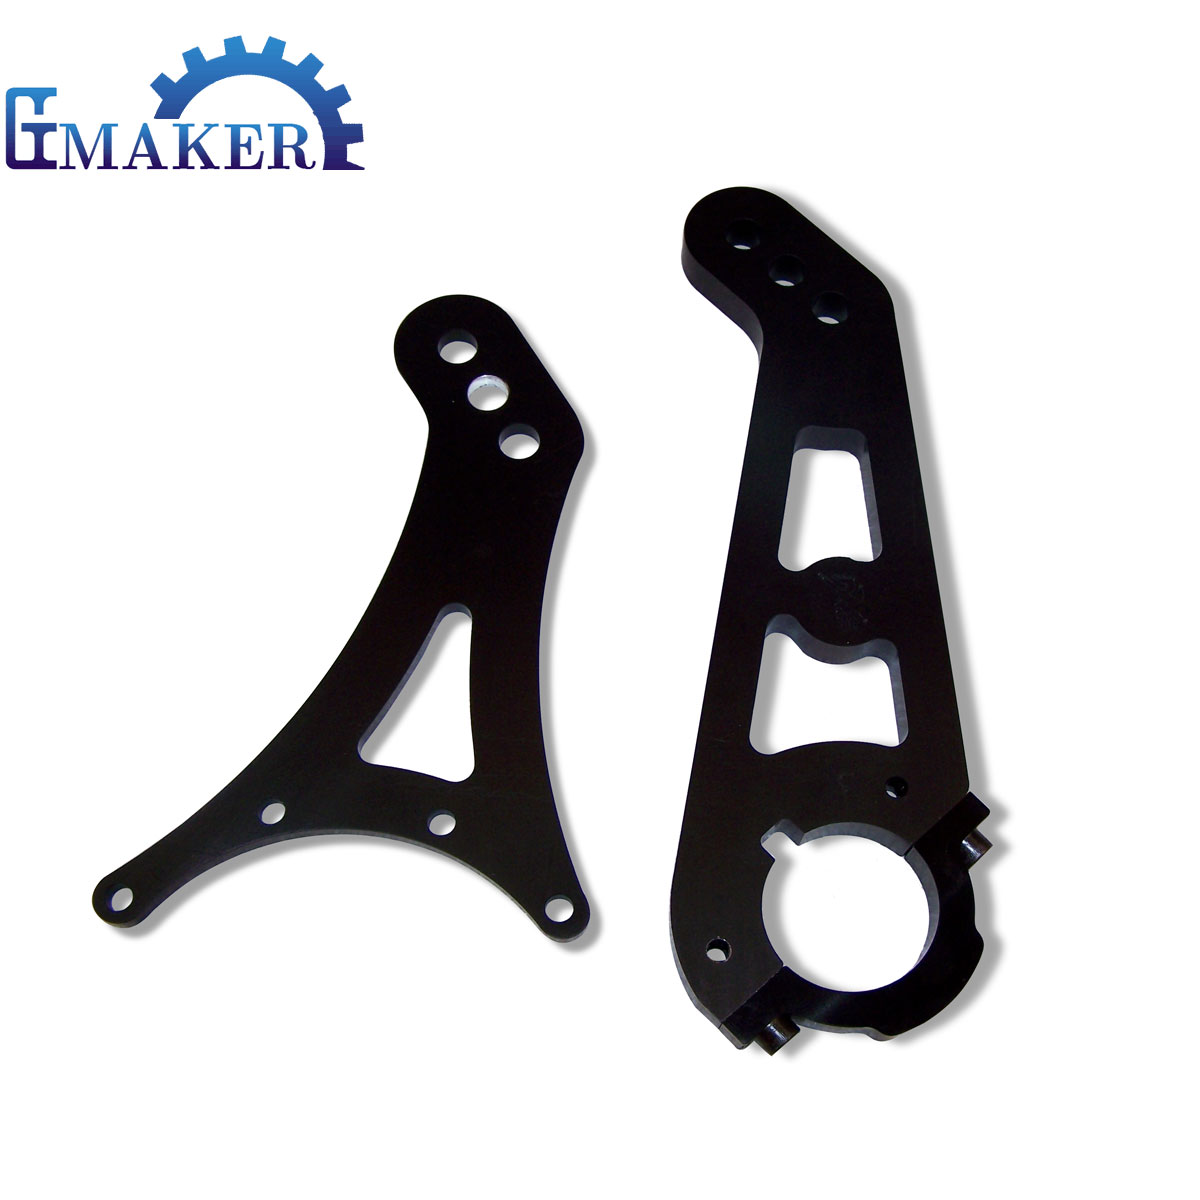 Metal Mill aluminum part with black hard anodized